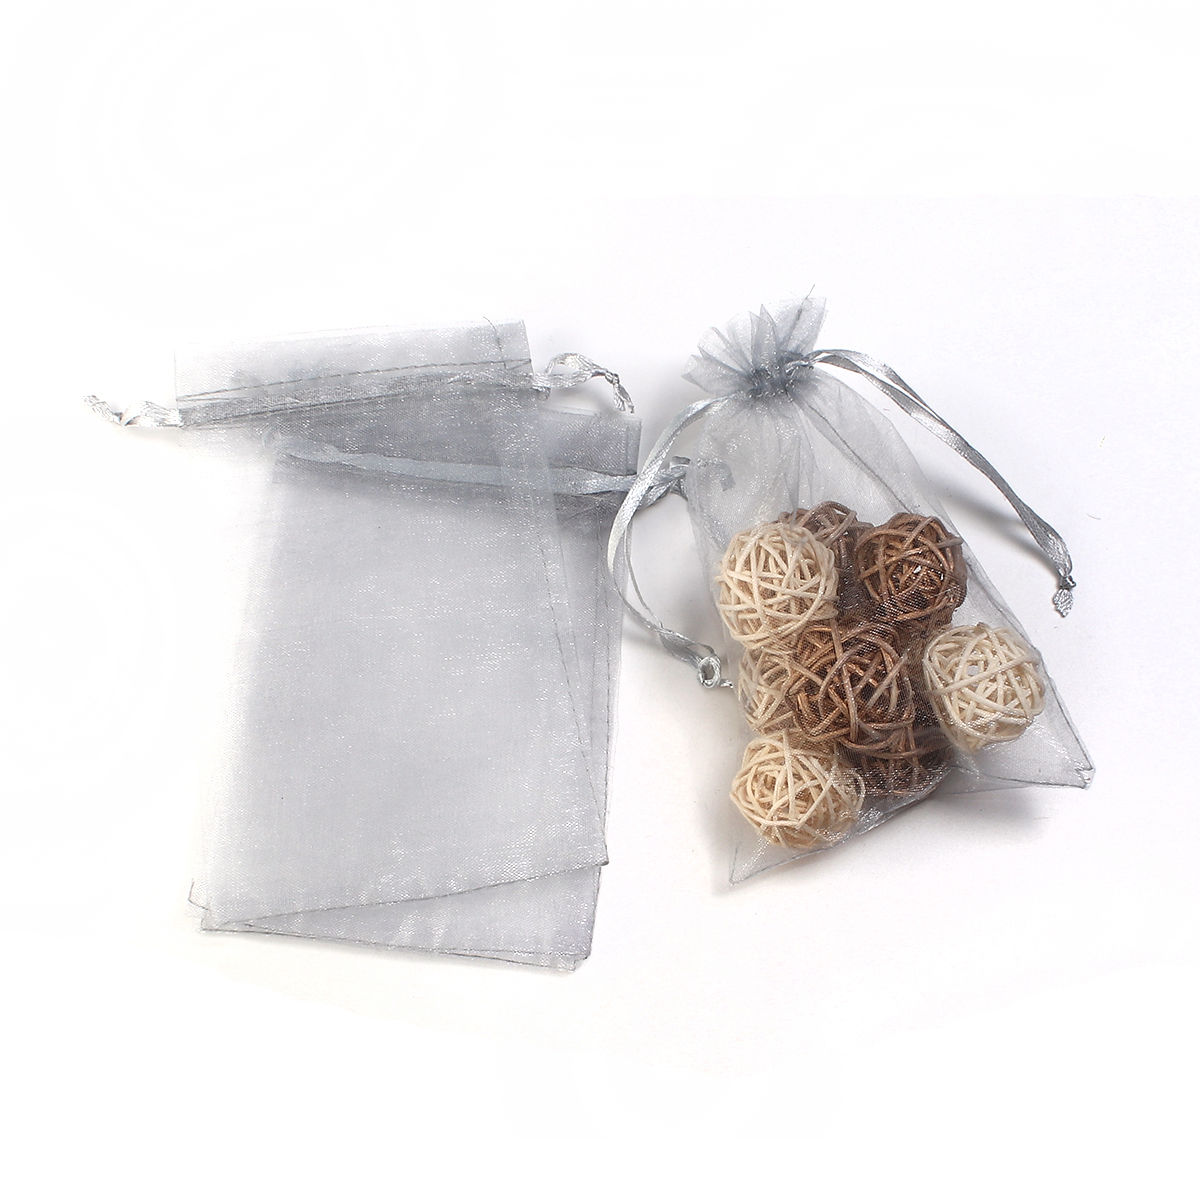 Picture of Wedding Gift Organza Jewelry Bags Drawstring Rectangle Gray (Usable Space: 13x10cm) 15cm(5 7/8") x 10cm(3 7/8"), 20 PCs